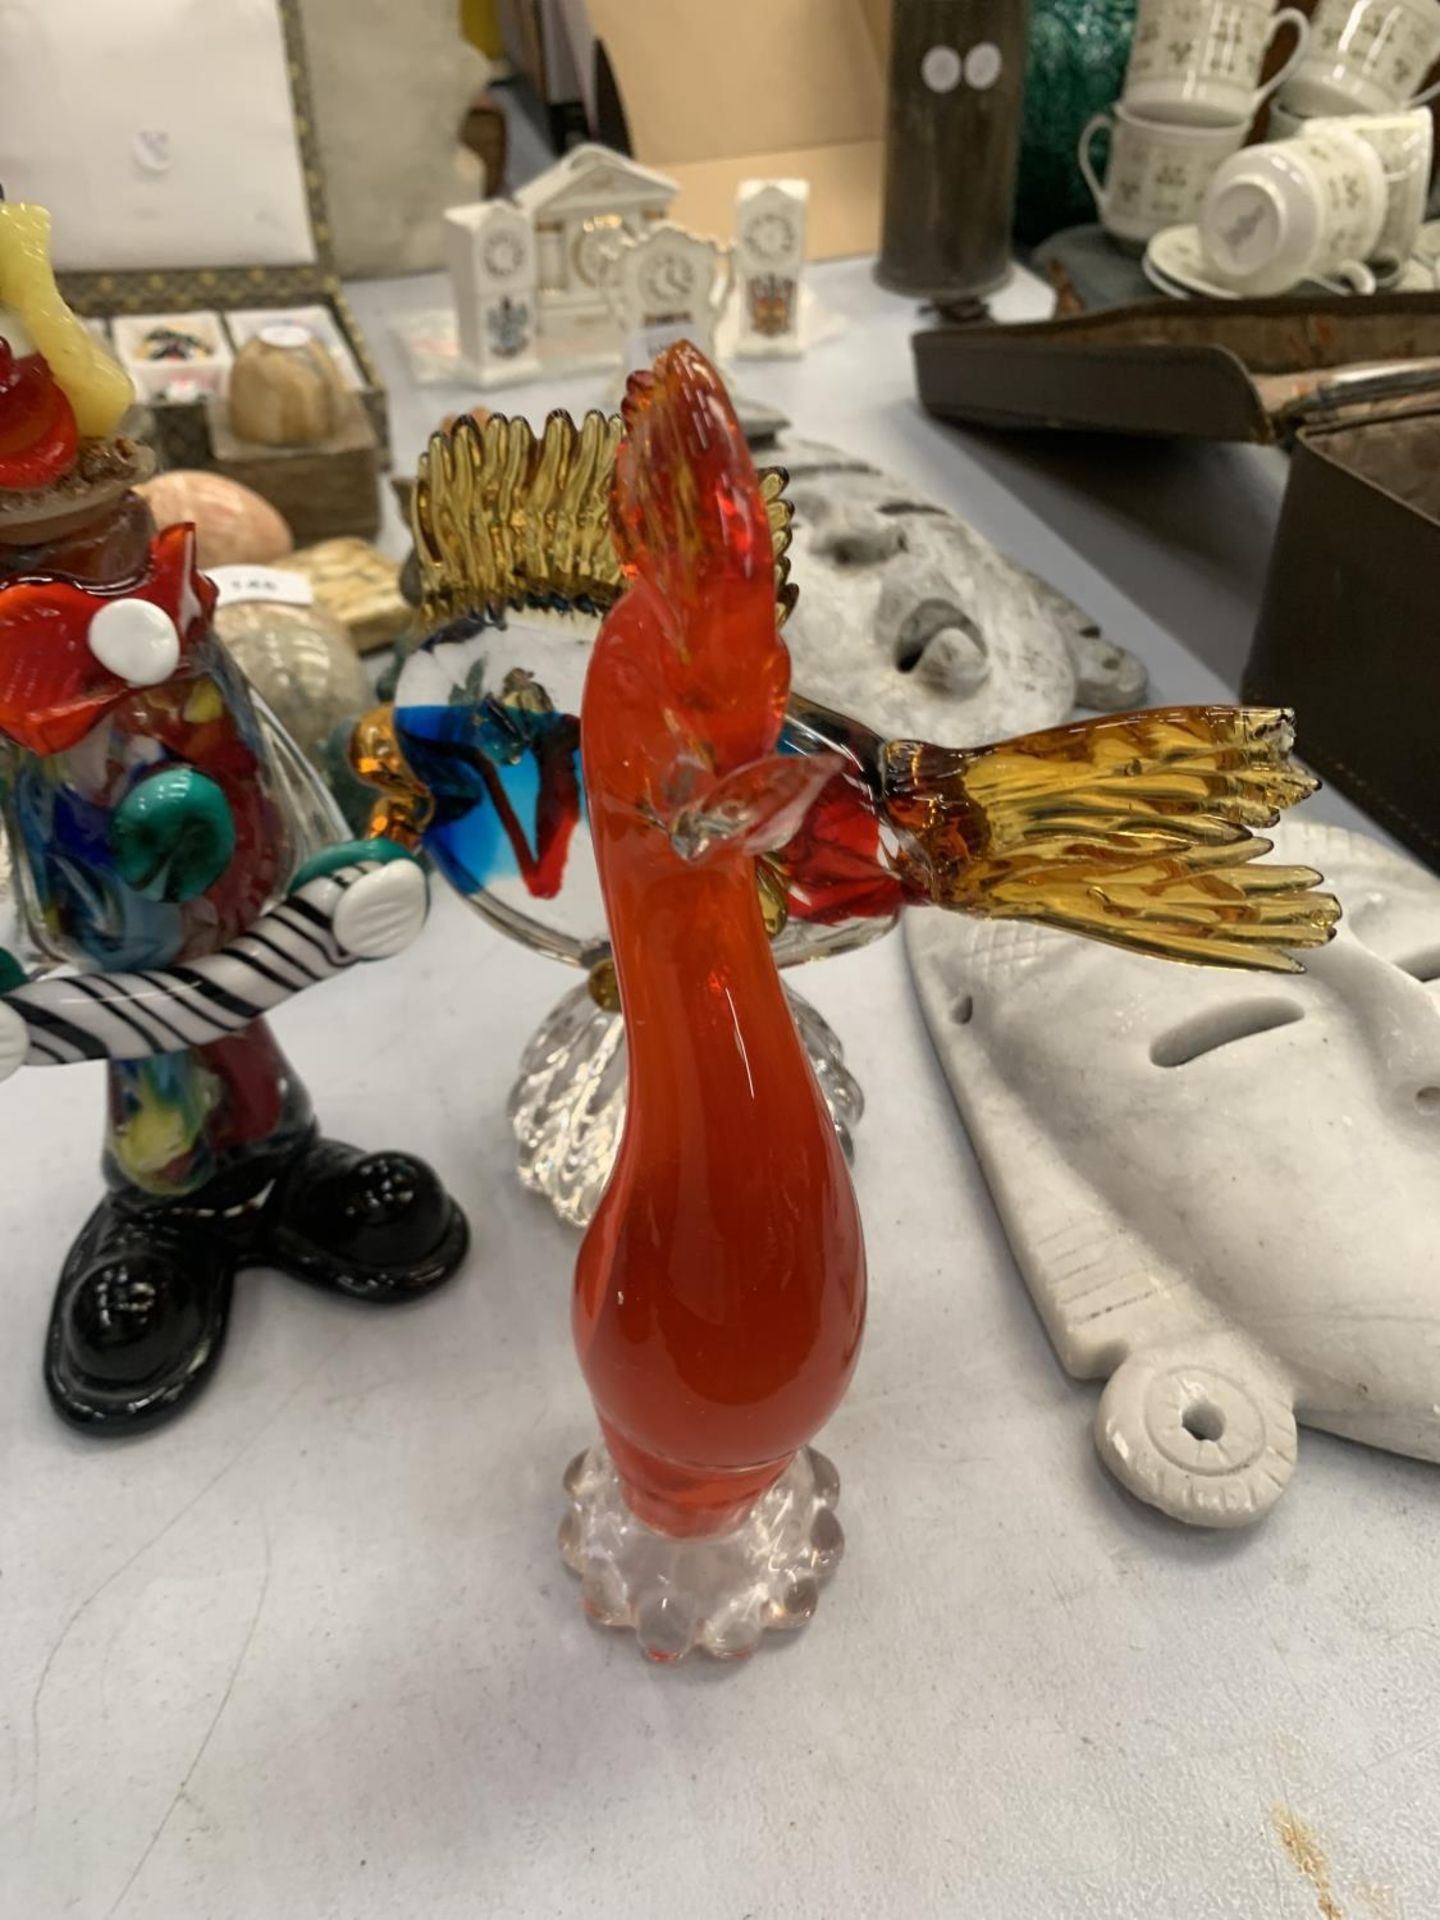 THREE MURANO GLASS FIGURES TO INCLUDE A CLOWN, FISH AND A COCKEREL - Image 2 of 5